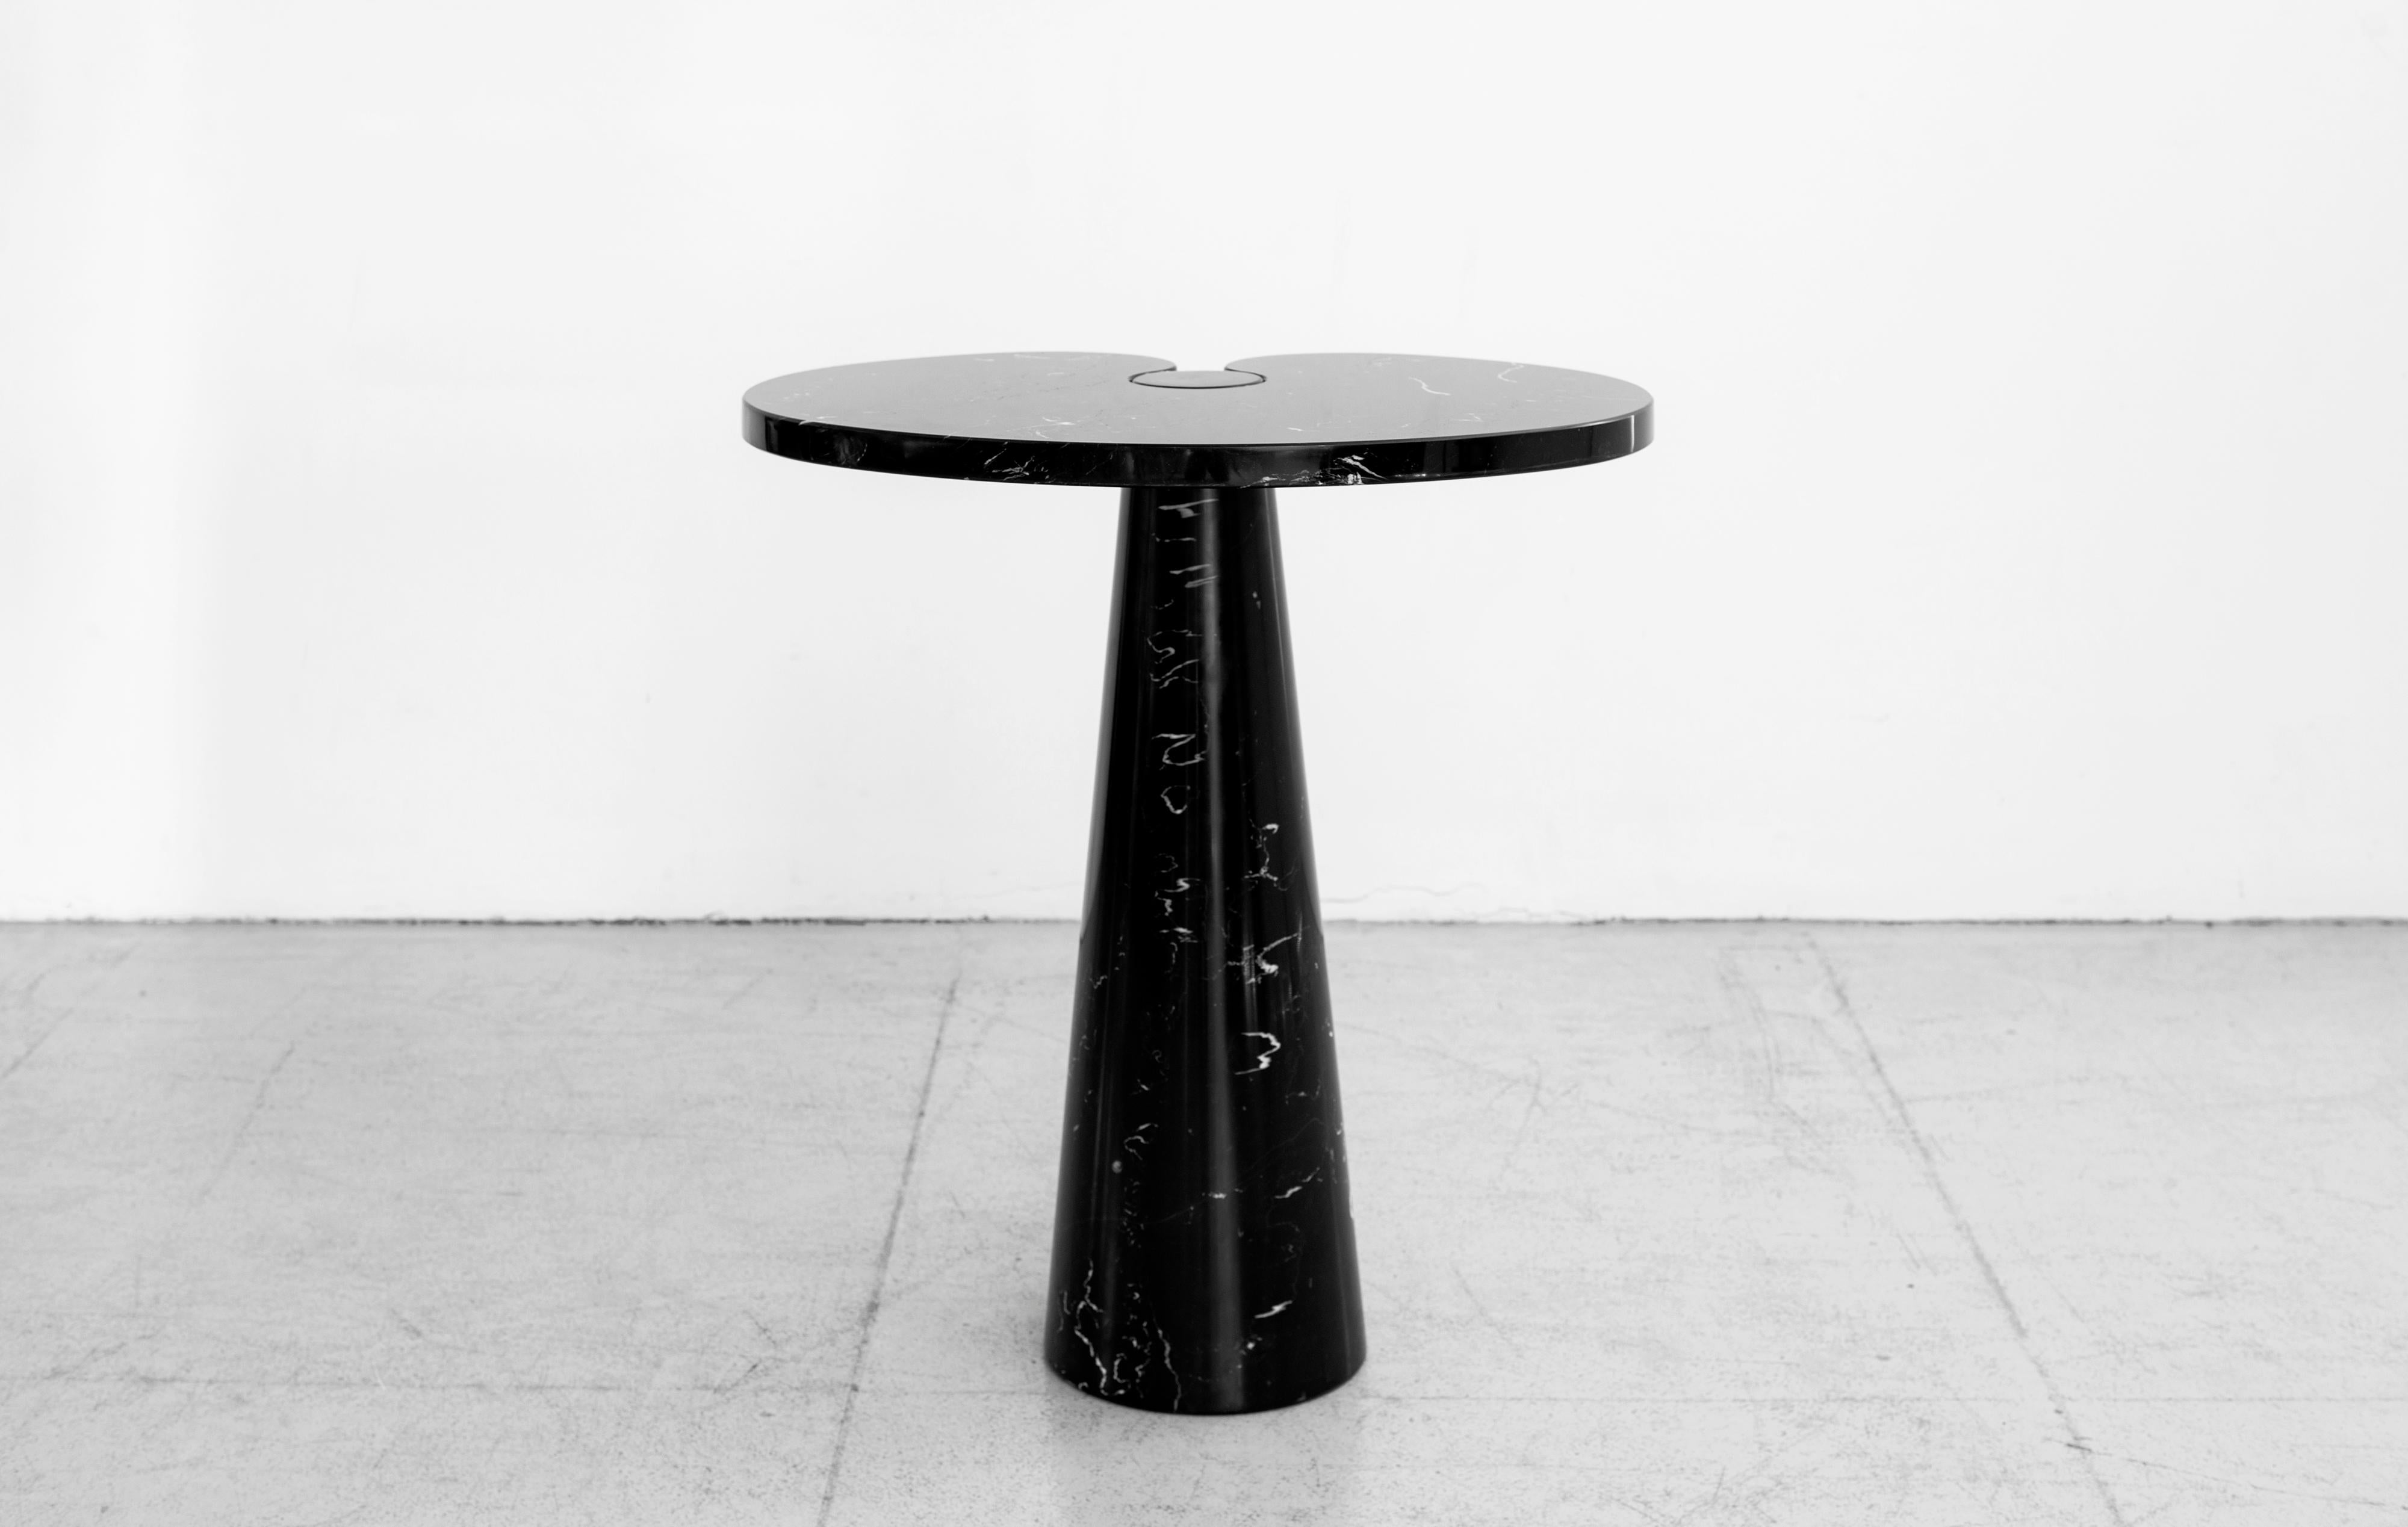 Rare side table by Angelo Mangiarotti with beautiful Italian black marquina marble. Larger size of the pair (sold separately)
Eros series and produced for Skipper, Italy 1970s.

2 tables available (priced separately)

Measures: Small table
W